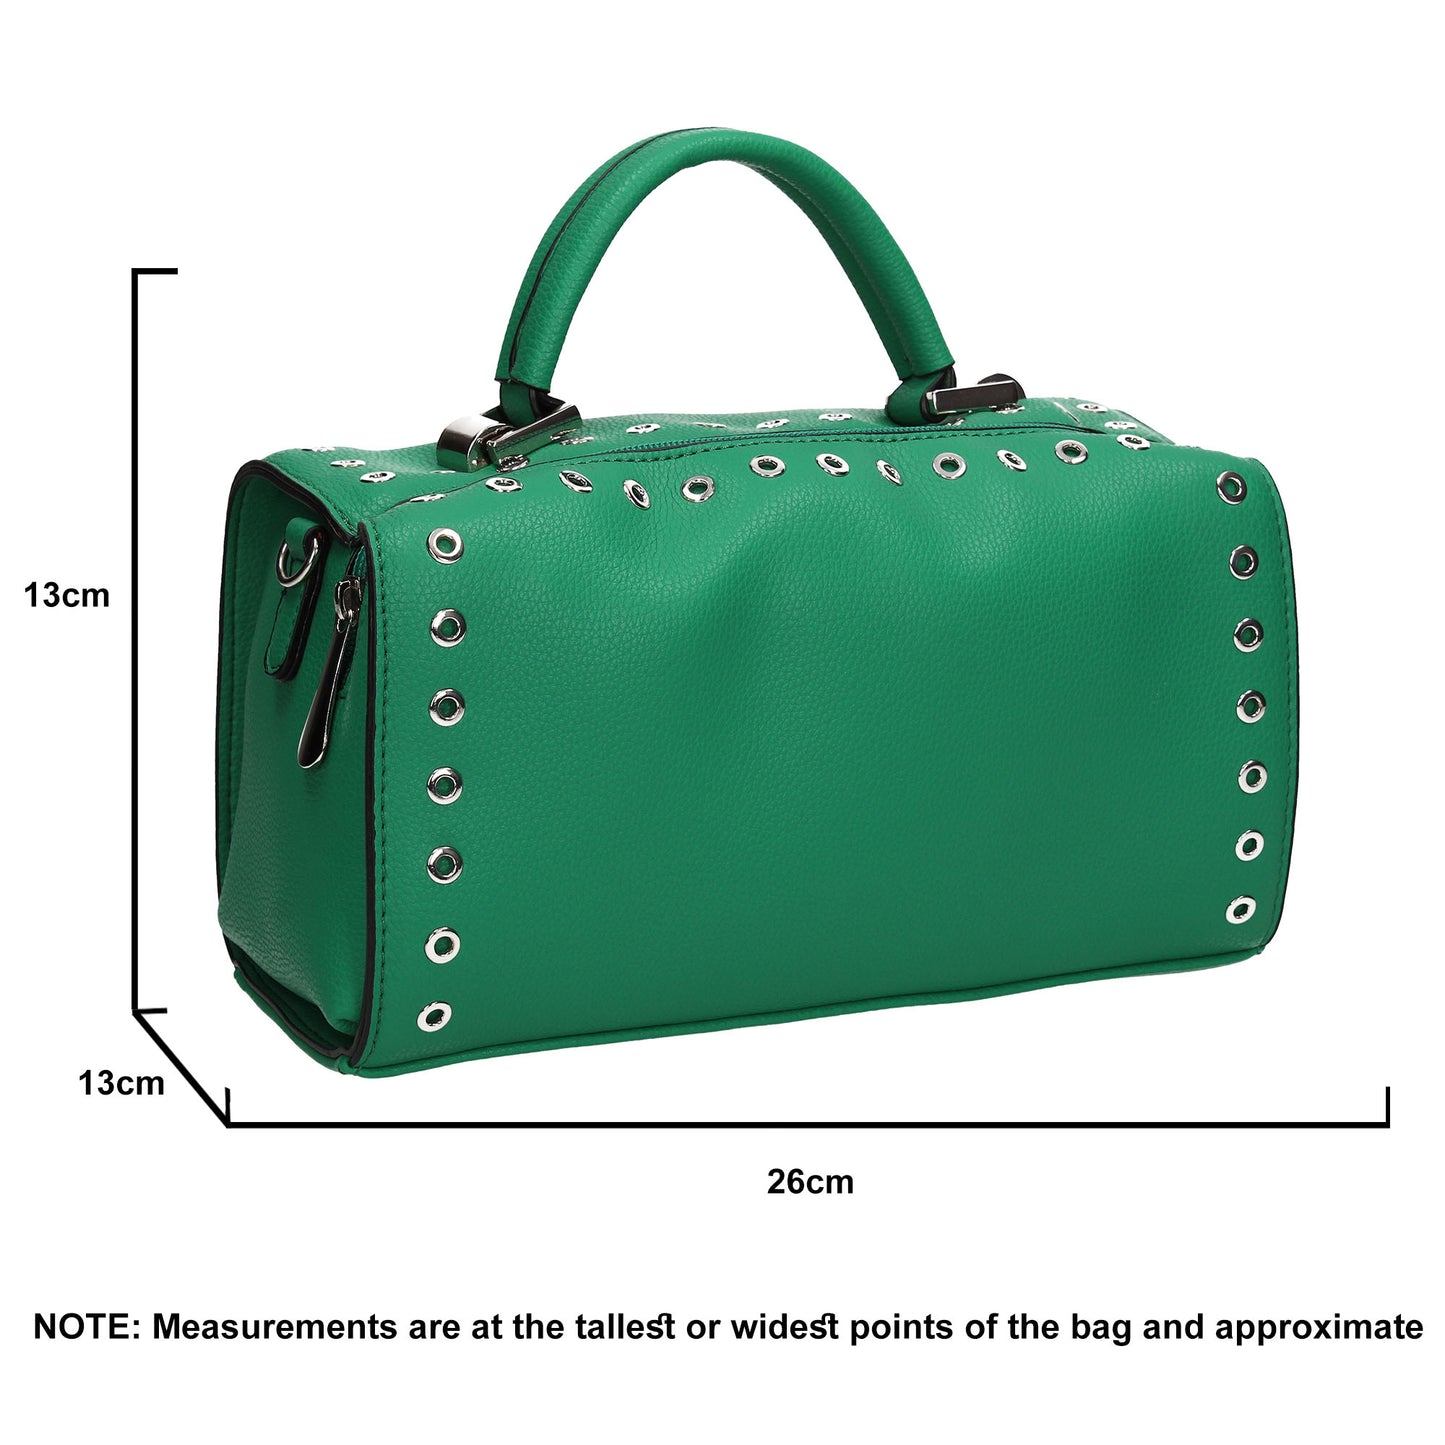 Buy your Anna Handbag Green Today! Buy with confidence from Swankyswans